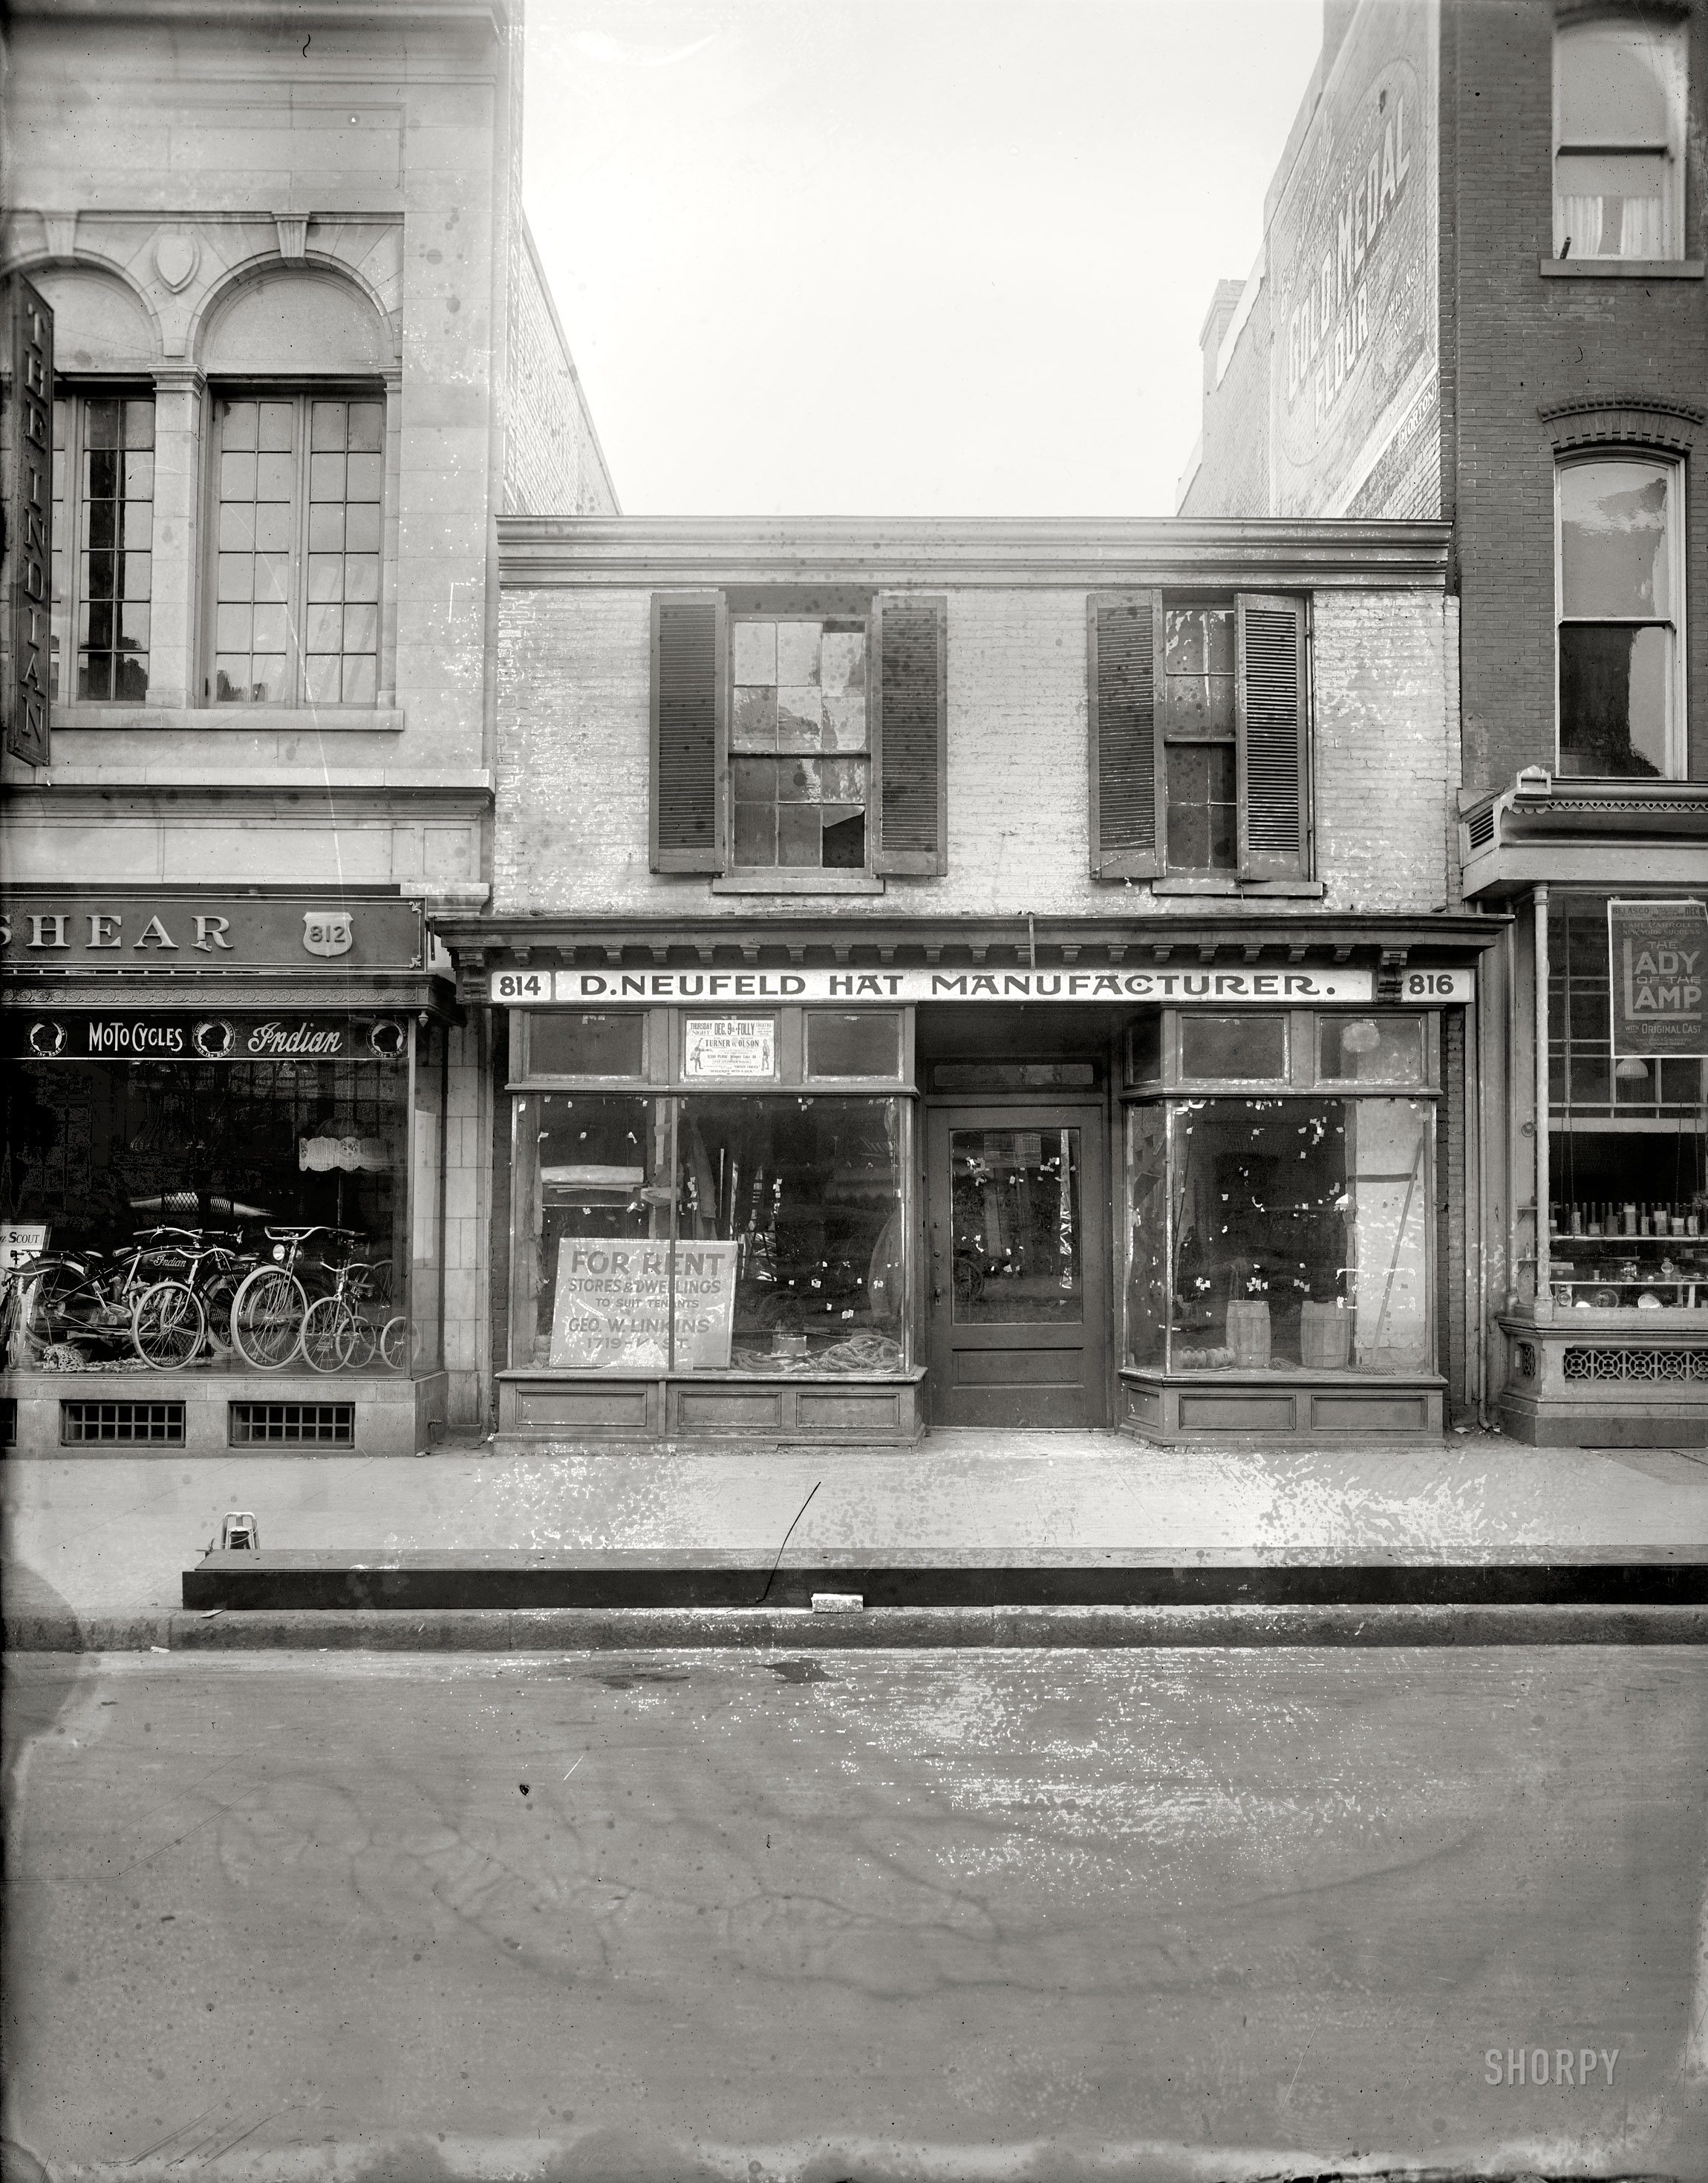 Washington, D.C., circa 1920. "814-816 Ninth Street N.W." Moldy negative of a decrepit storefront, with many musty details. National Photo Co. View full size.